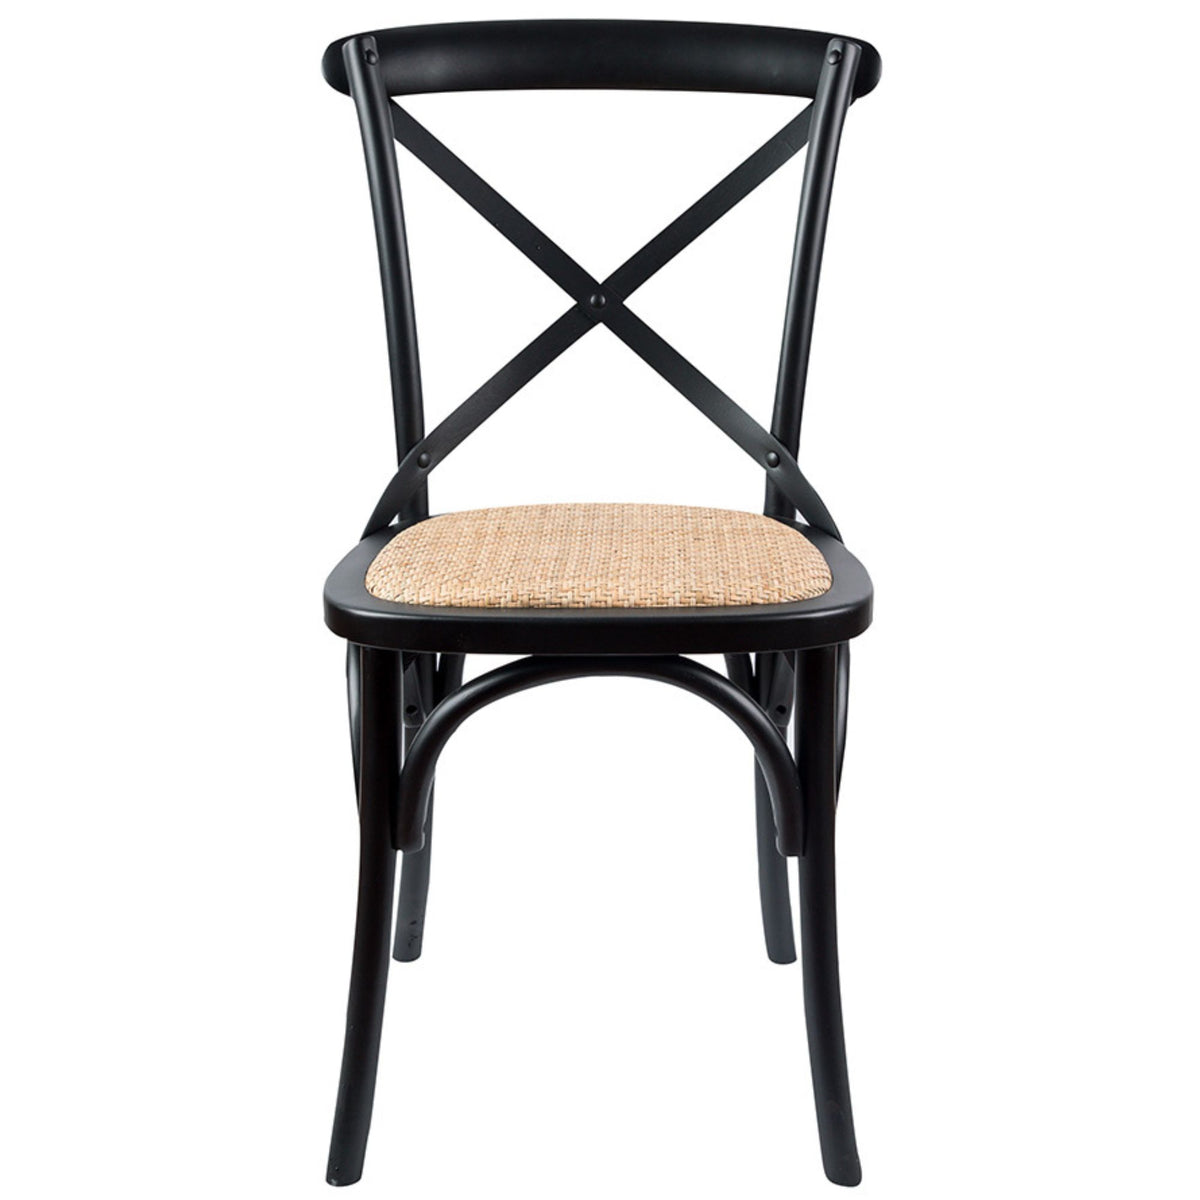 Aster Crossback Dining Chair Set of 2 Solid Birch Timber Wood Ratan Seat - Black